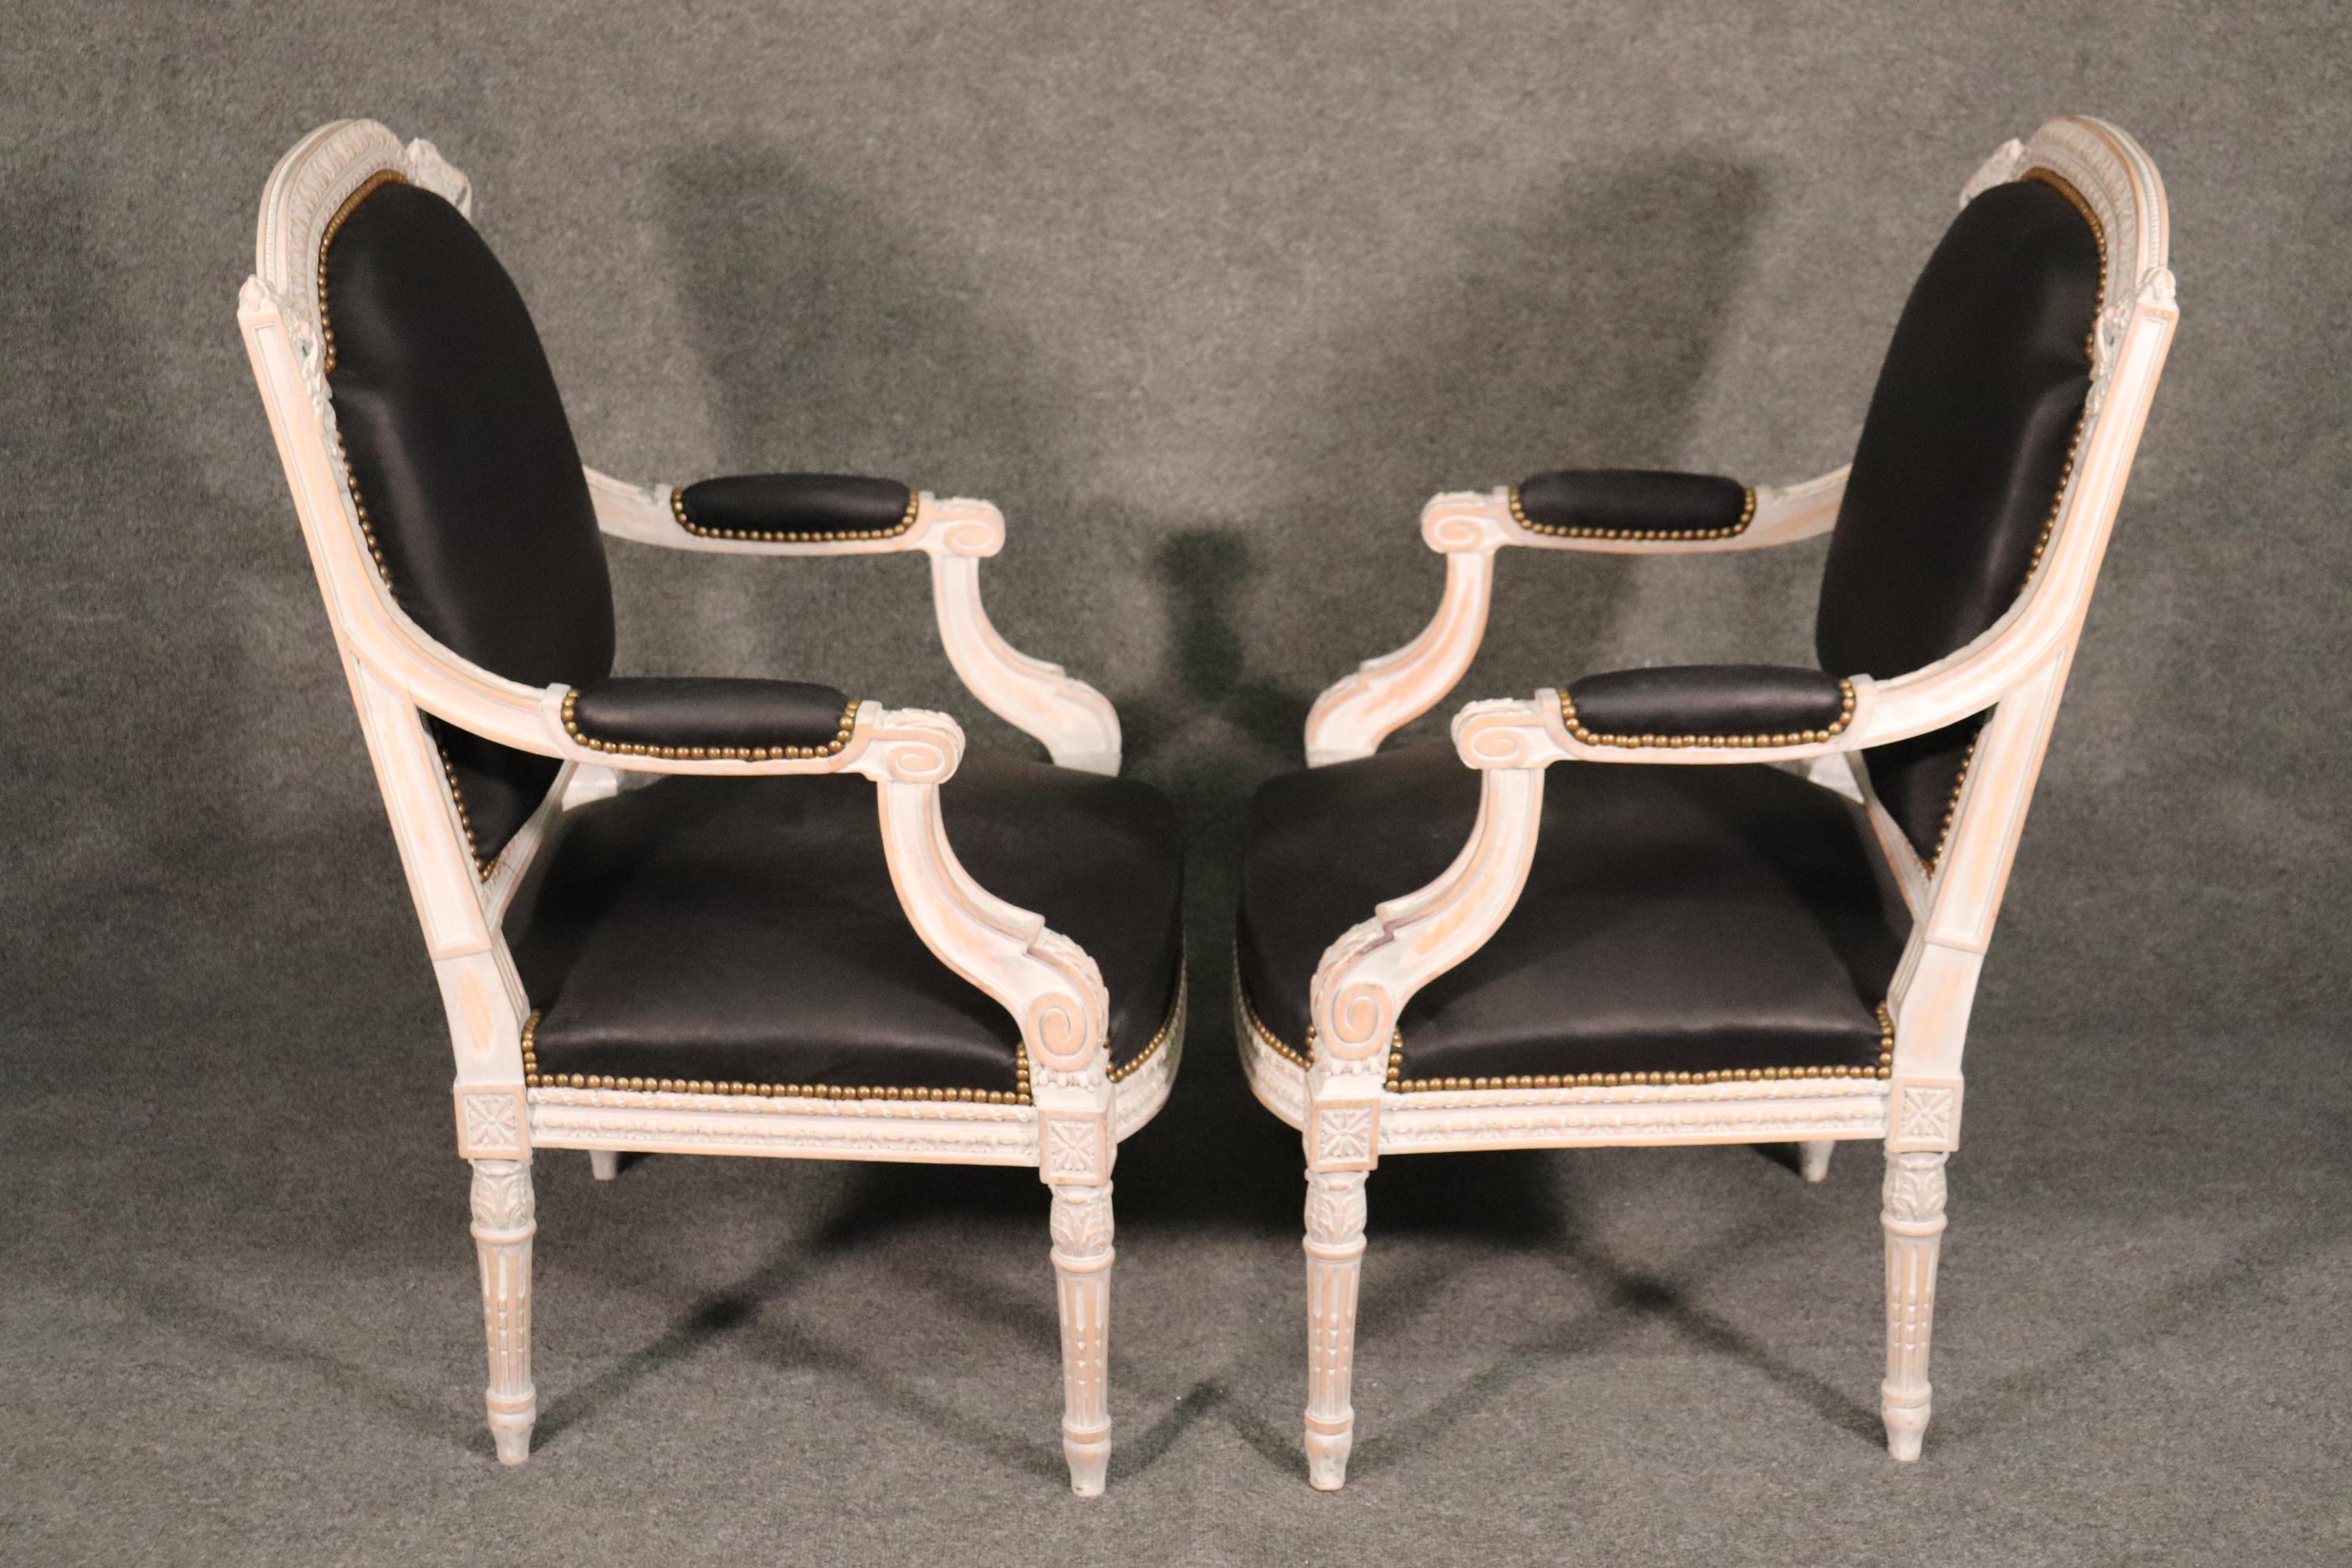 These leather upholstered chairs are an excersize in contrast and the power of black leather against a white background. The chairs are in very good condition and while not new, look fantastic. The chairs date to the 1980s and measures 40 tall x 26